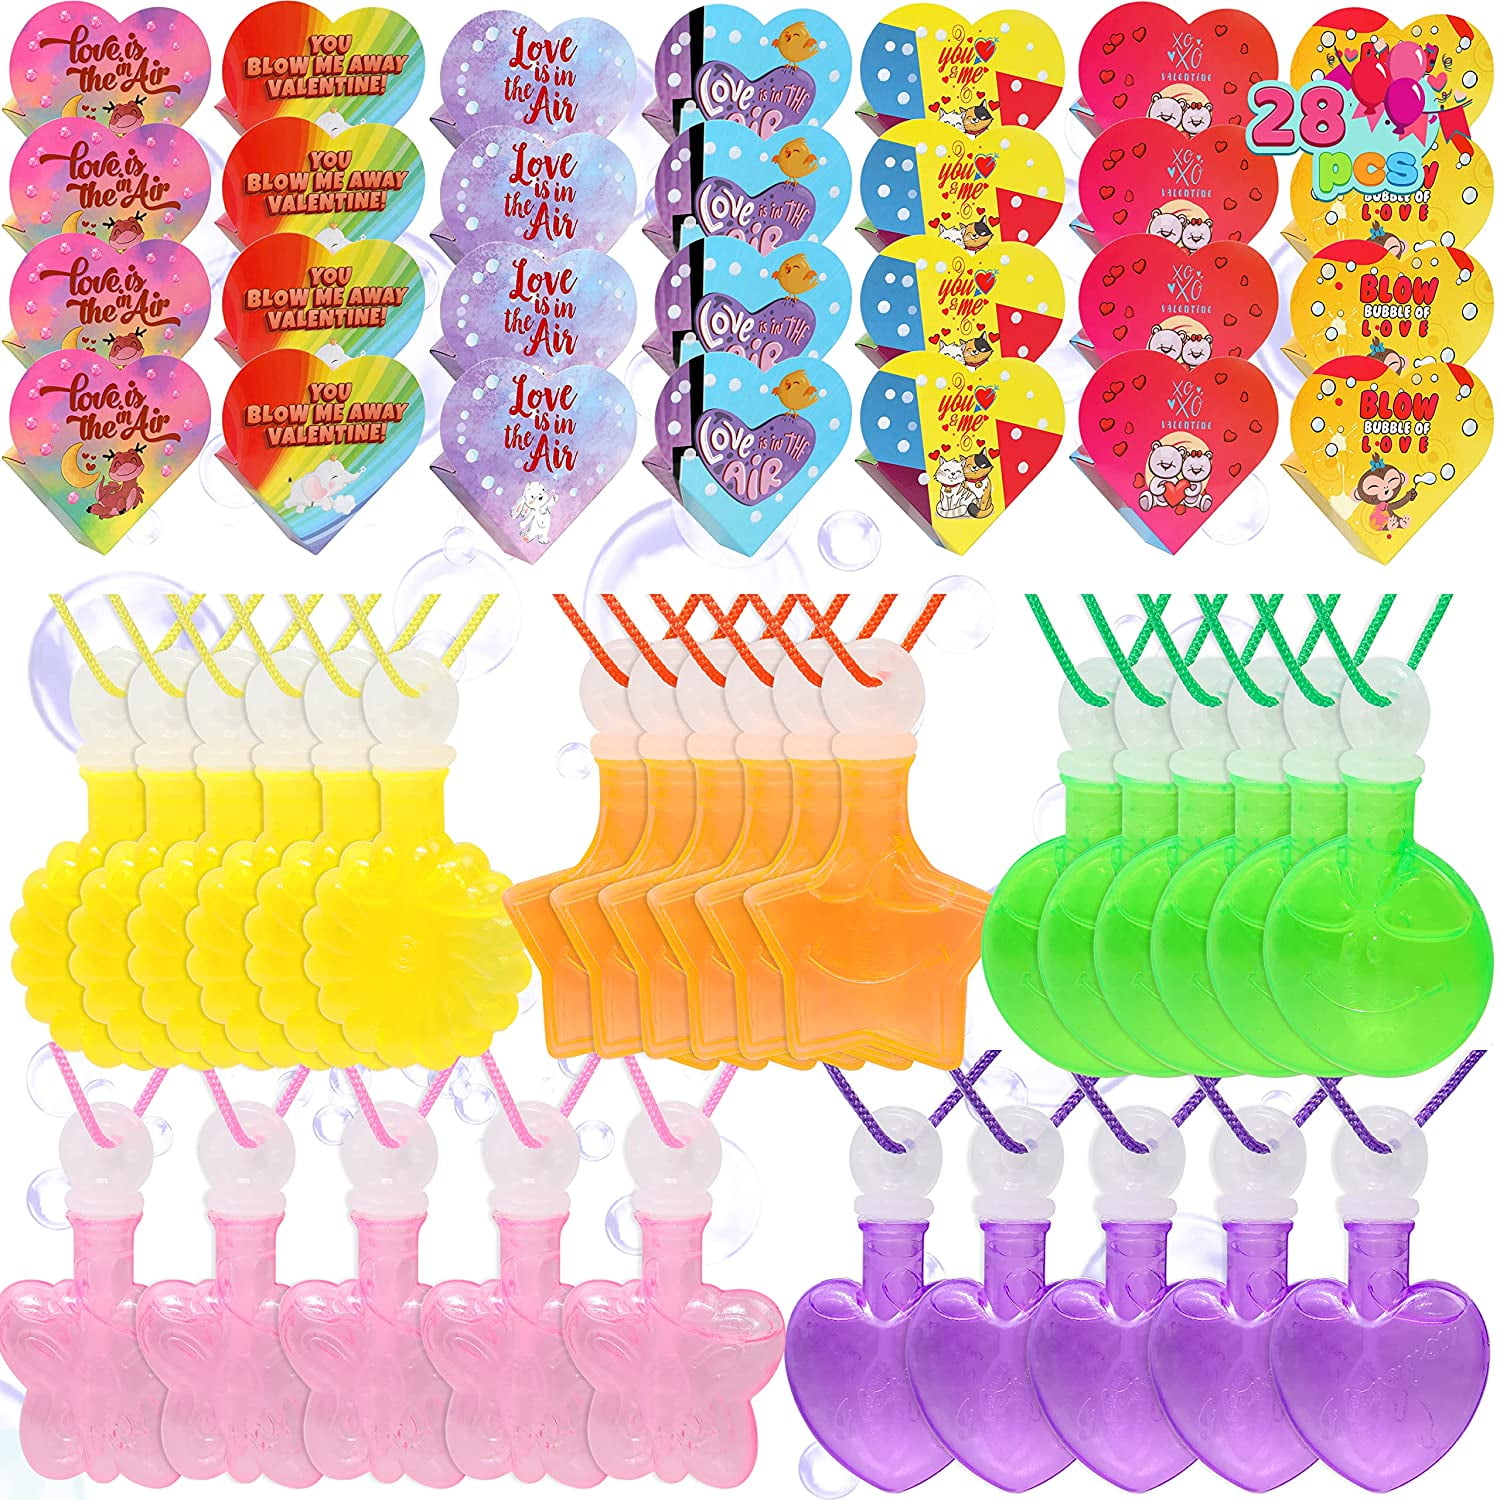 Valentine’s Gifts for Boys and Girls Classroom Exchange Prizes 12 Pack Valentines Heart-Shaped Bubble Bottles with Blow Bubbles Solution for Kids Party Favors 